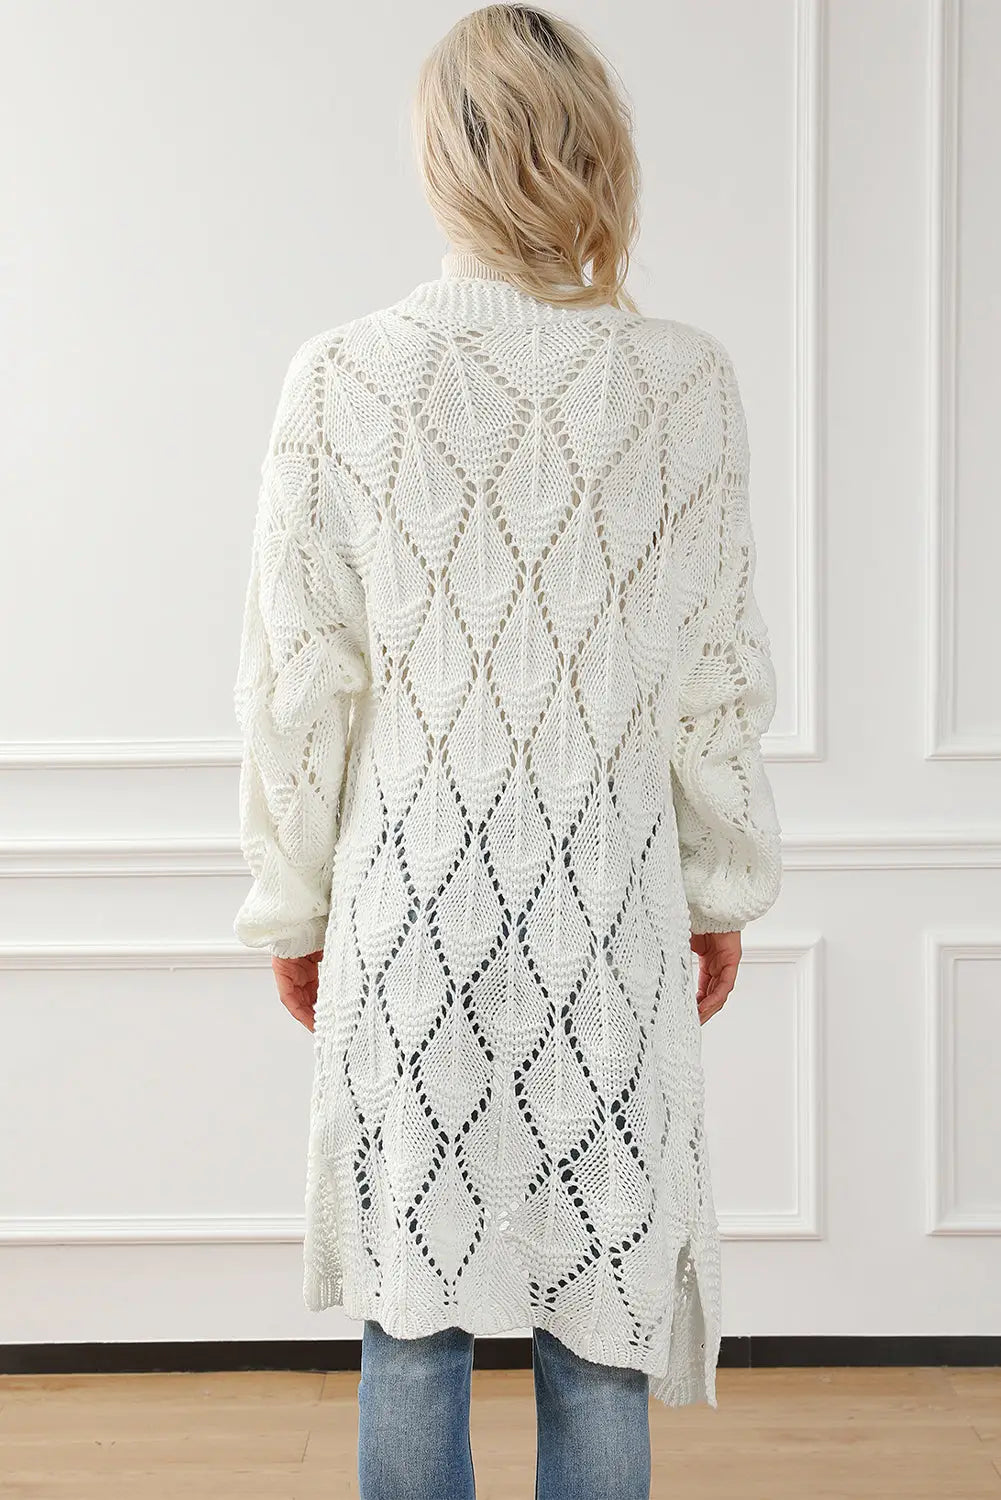 White rhombus hollowed knit open front cardigan - sweaters & cardigans